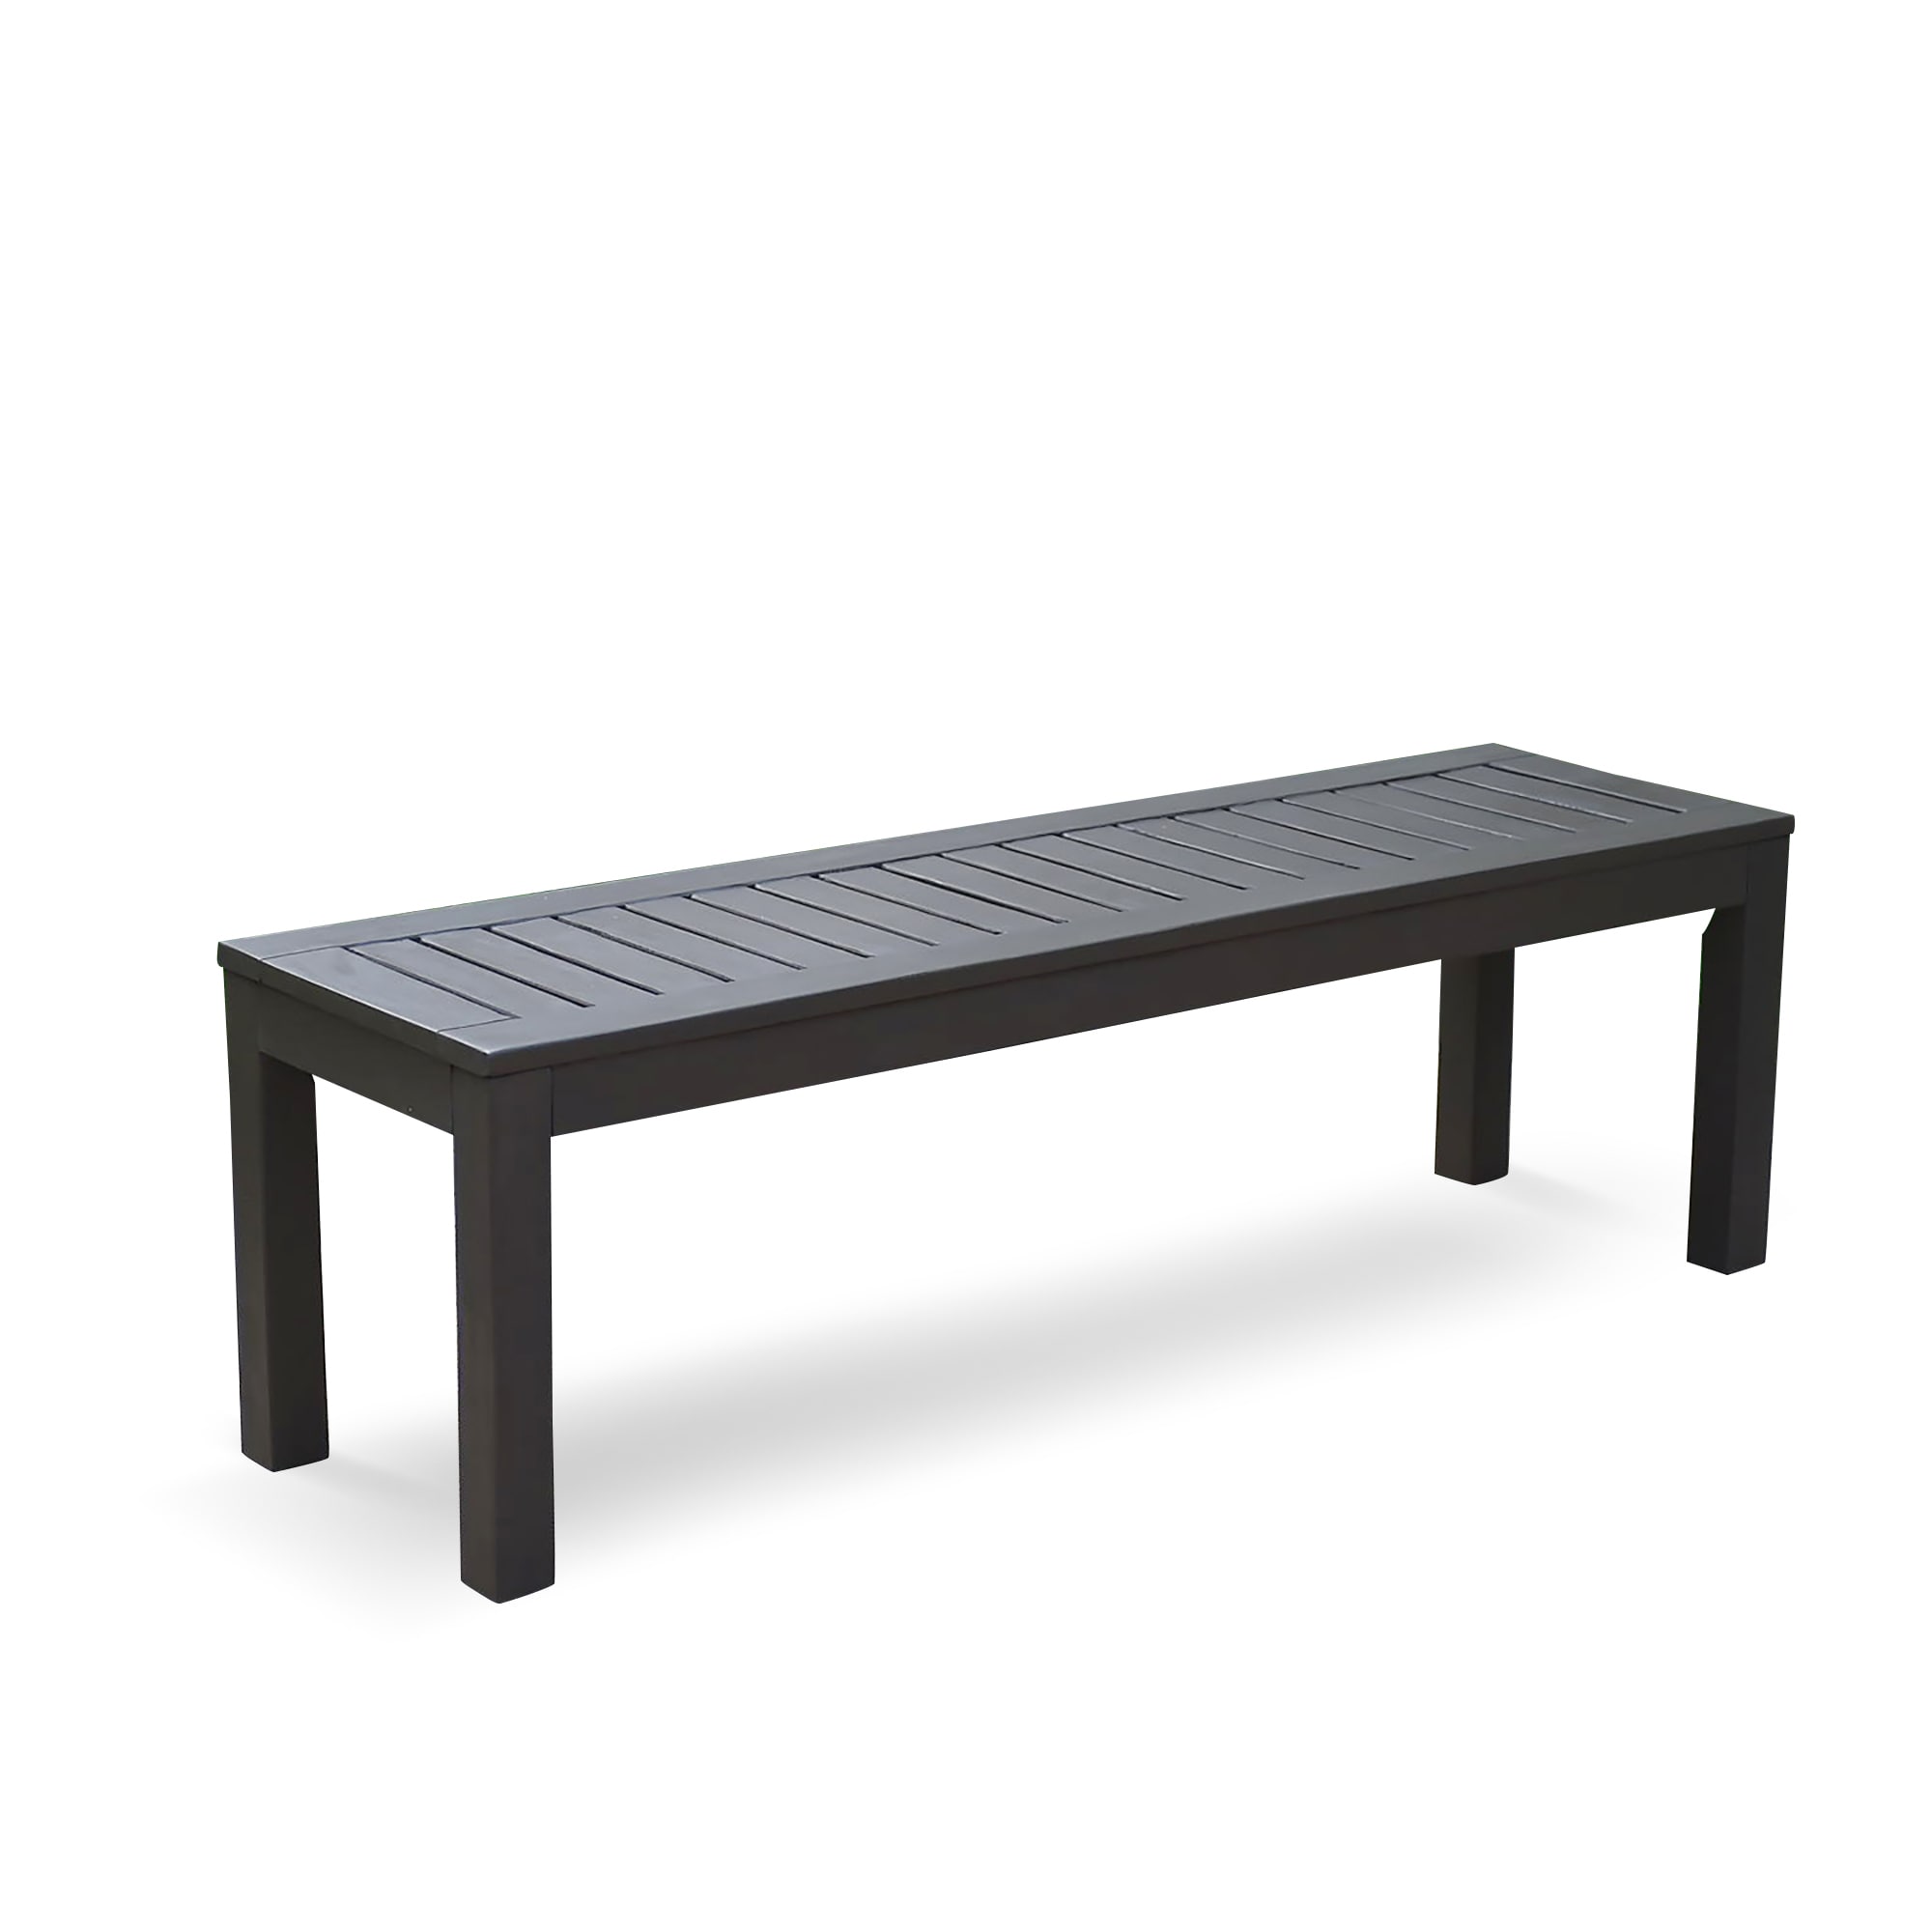 17-in in Patio 55-in Casual H x the Bench at Benches Dark W Gray Cambridge Braga Dining department